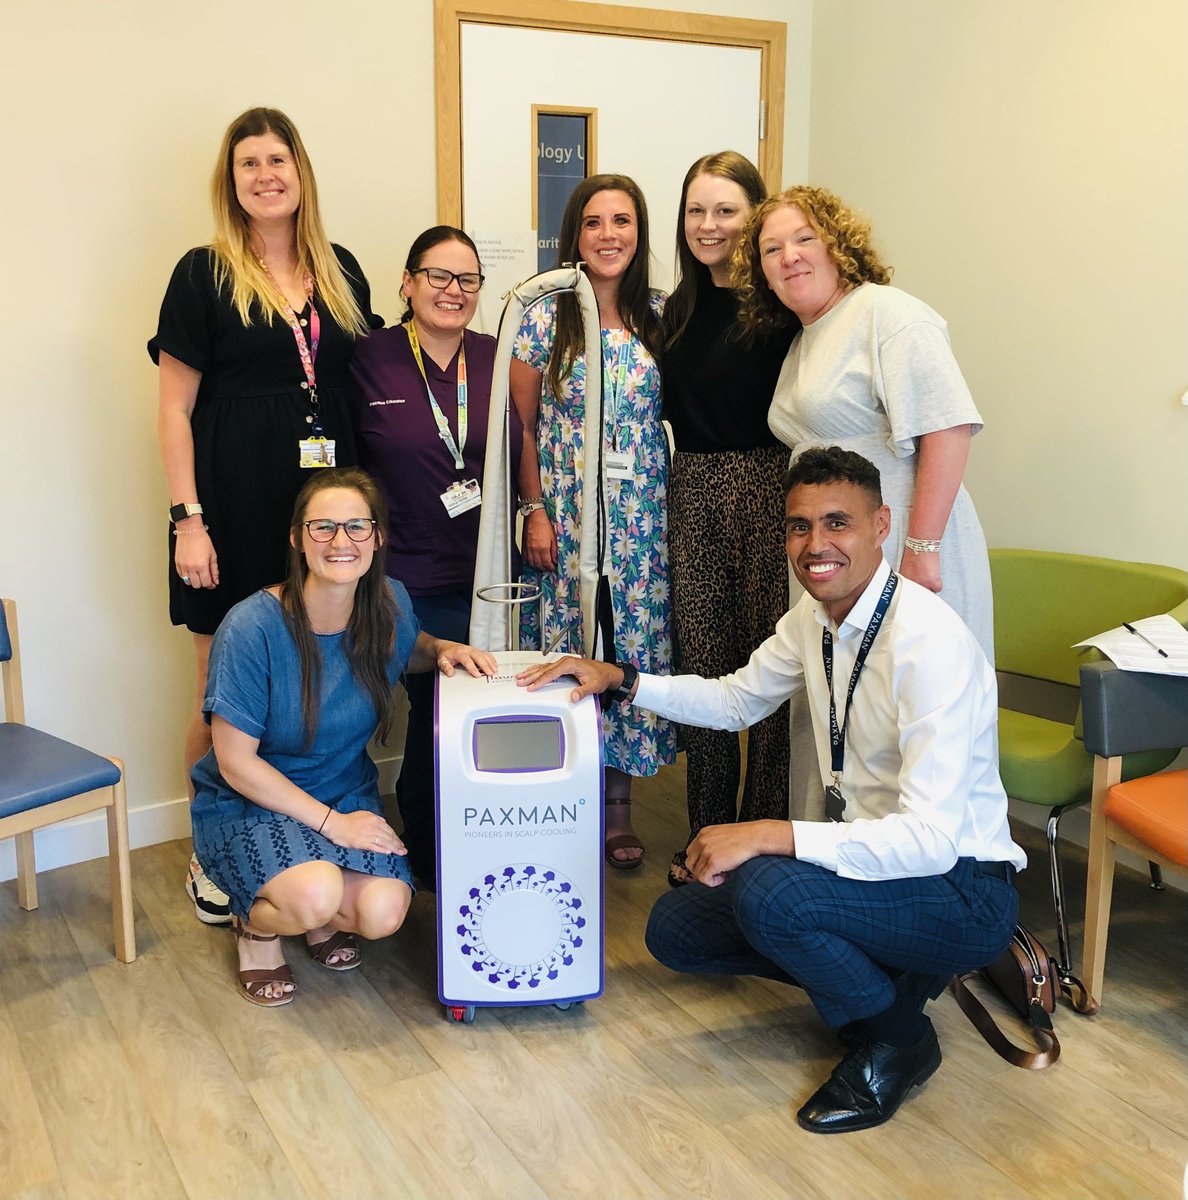 @scalpcooling A lovely afternoon delivering a #scalpcooling presentation to the #youthcancertrust team at Alder Hey Hospital in partnership with @projectyouthcan 💙🙌🏾 #changingthefaceofcancer #youthcancercare #chemotherapyinducedalopecia